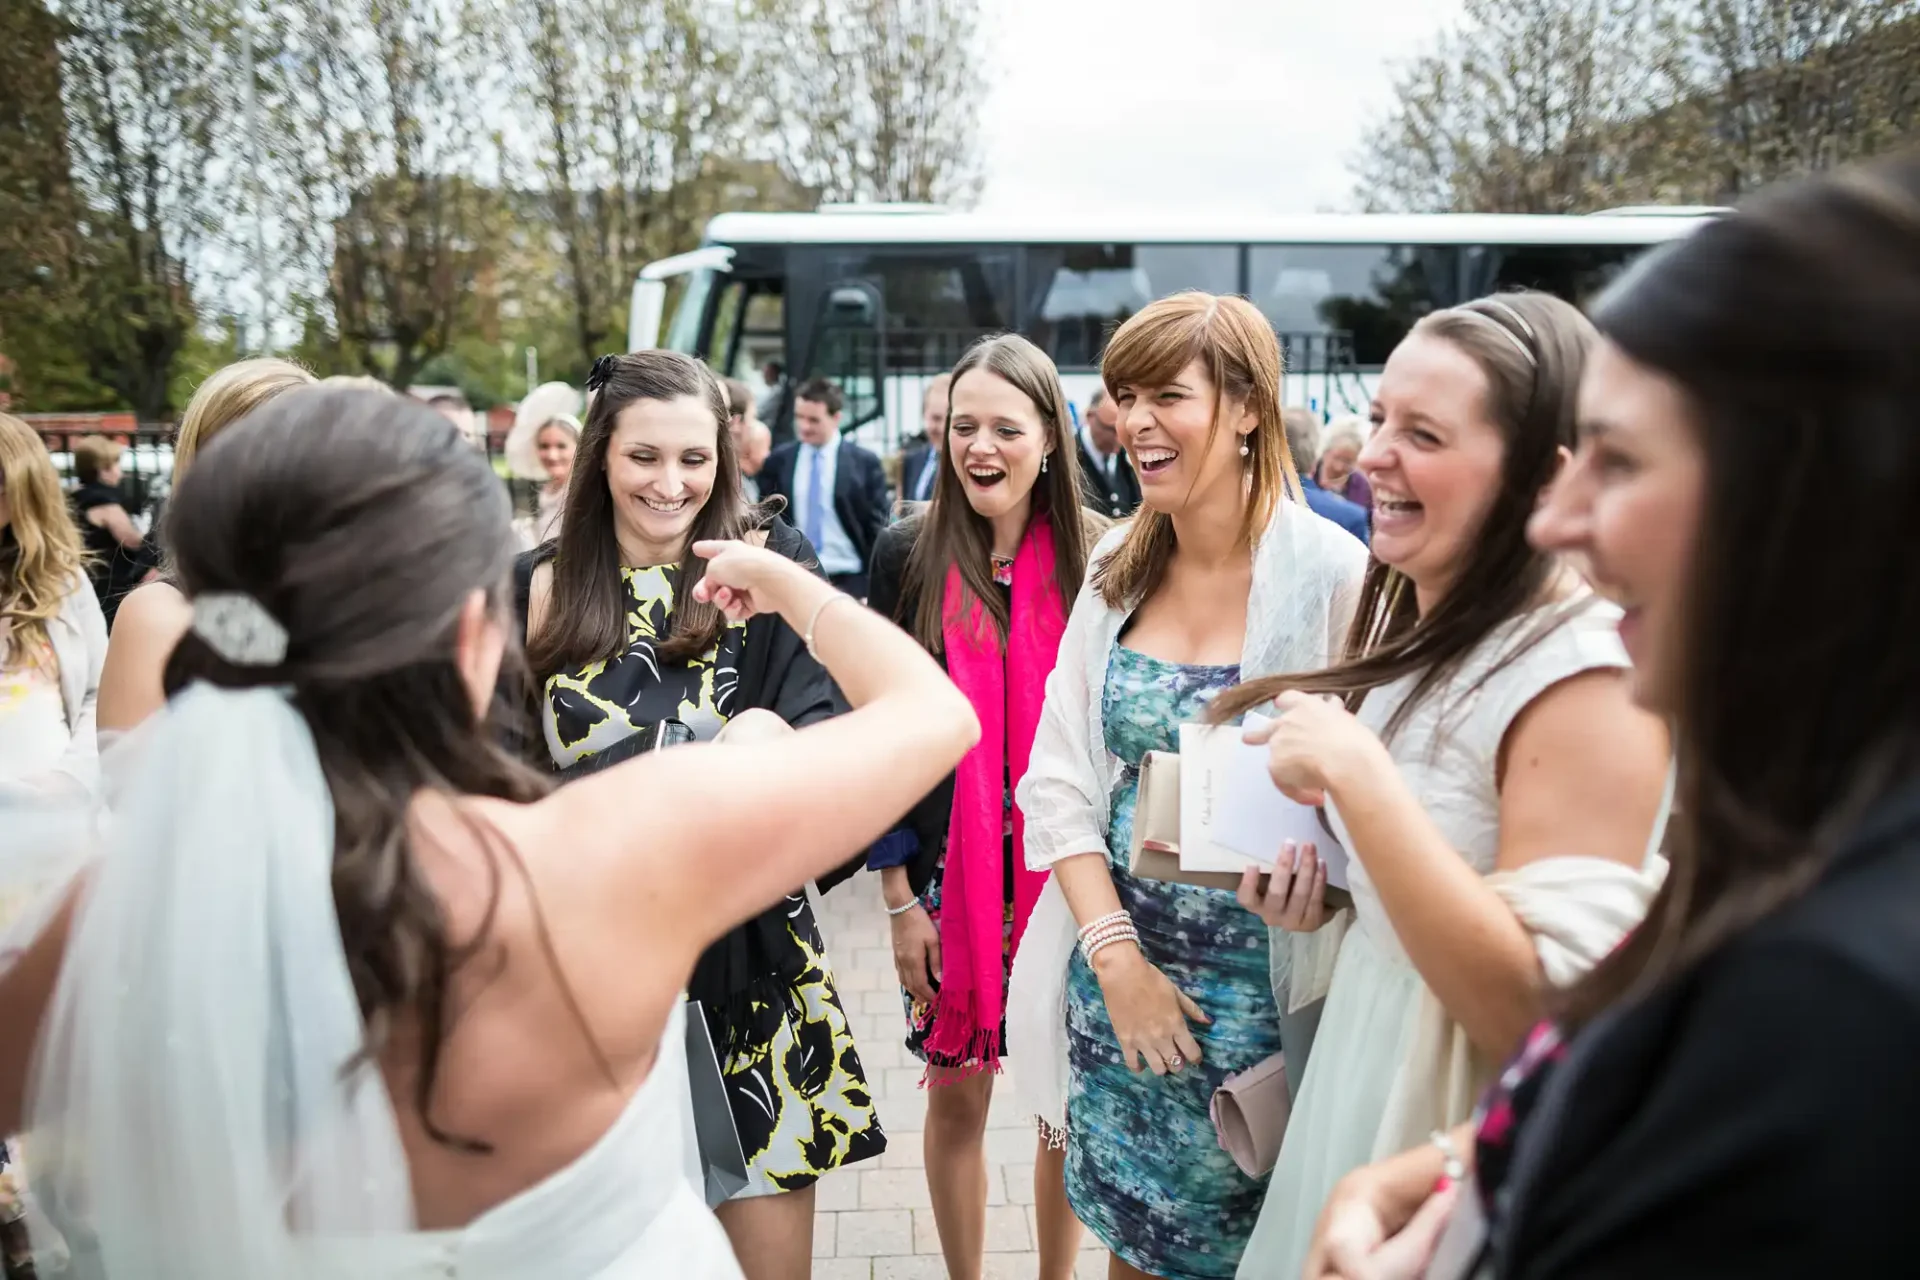 A bride joyfully greeting a group of women in colorful dresses at an outdoor event, with a bus parked in the background.